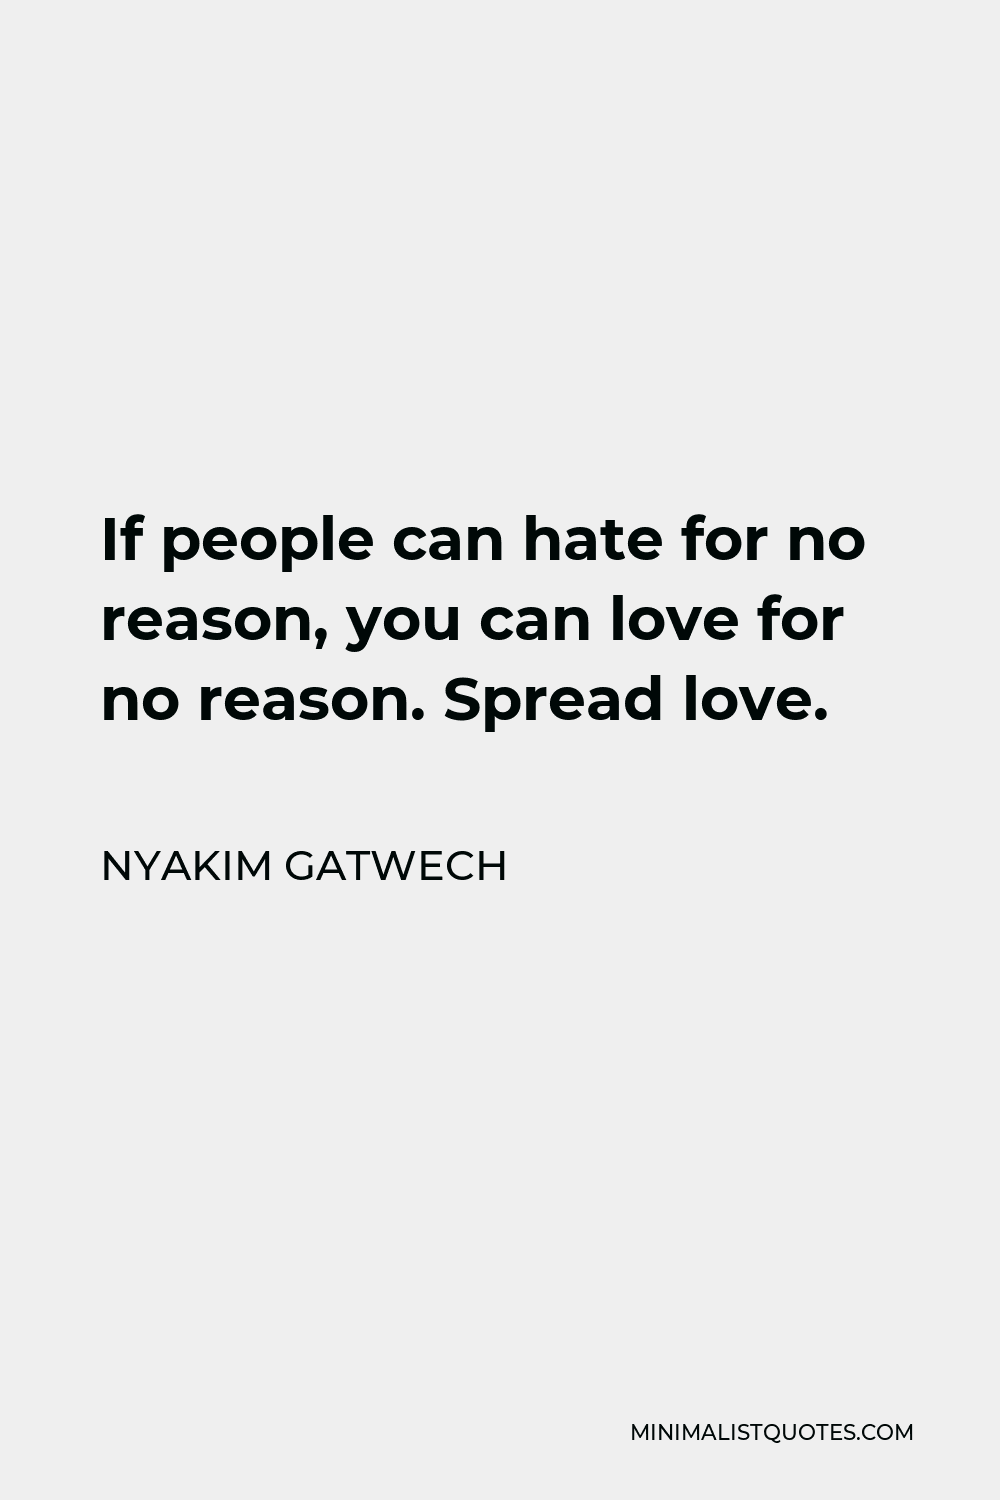 Nyakim Gatwech Quote: If people can hate for no reason, you can ...